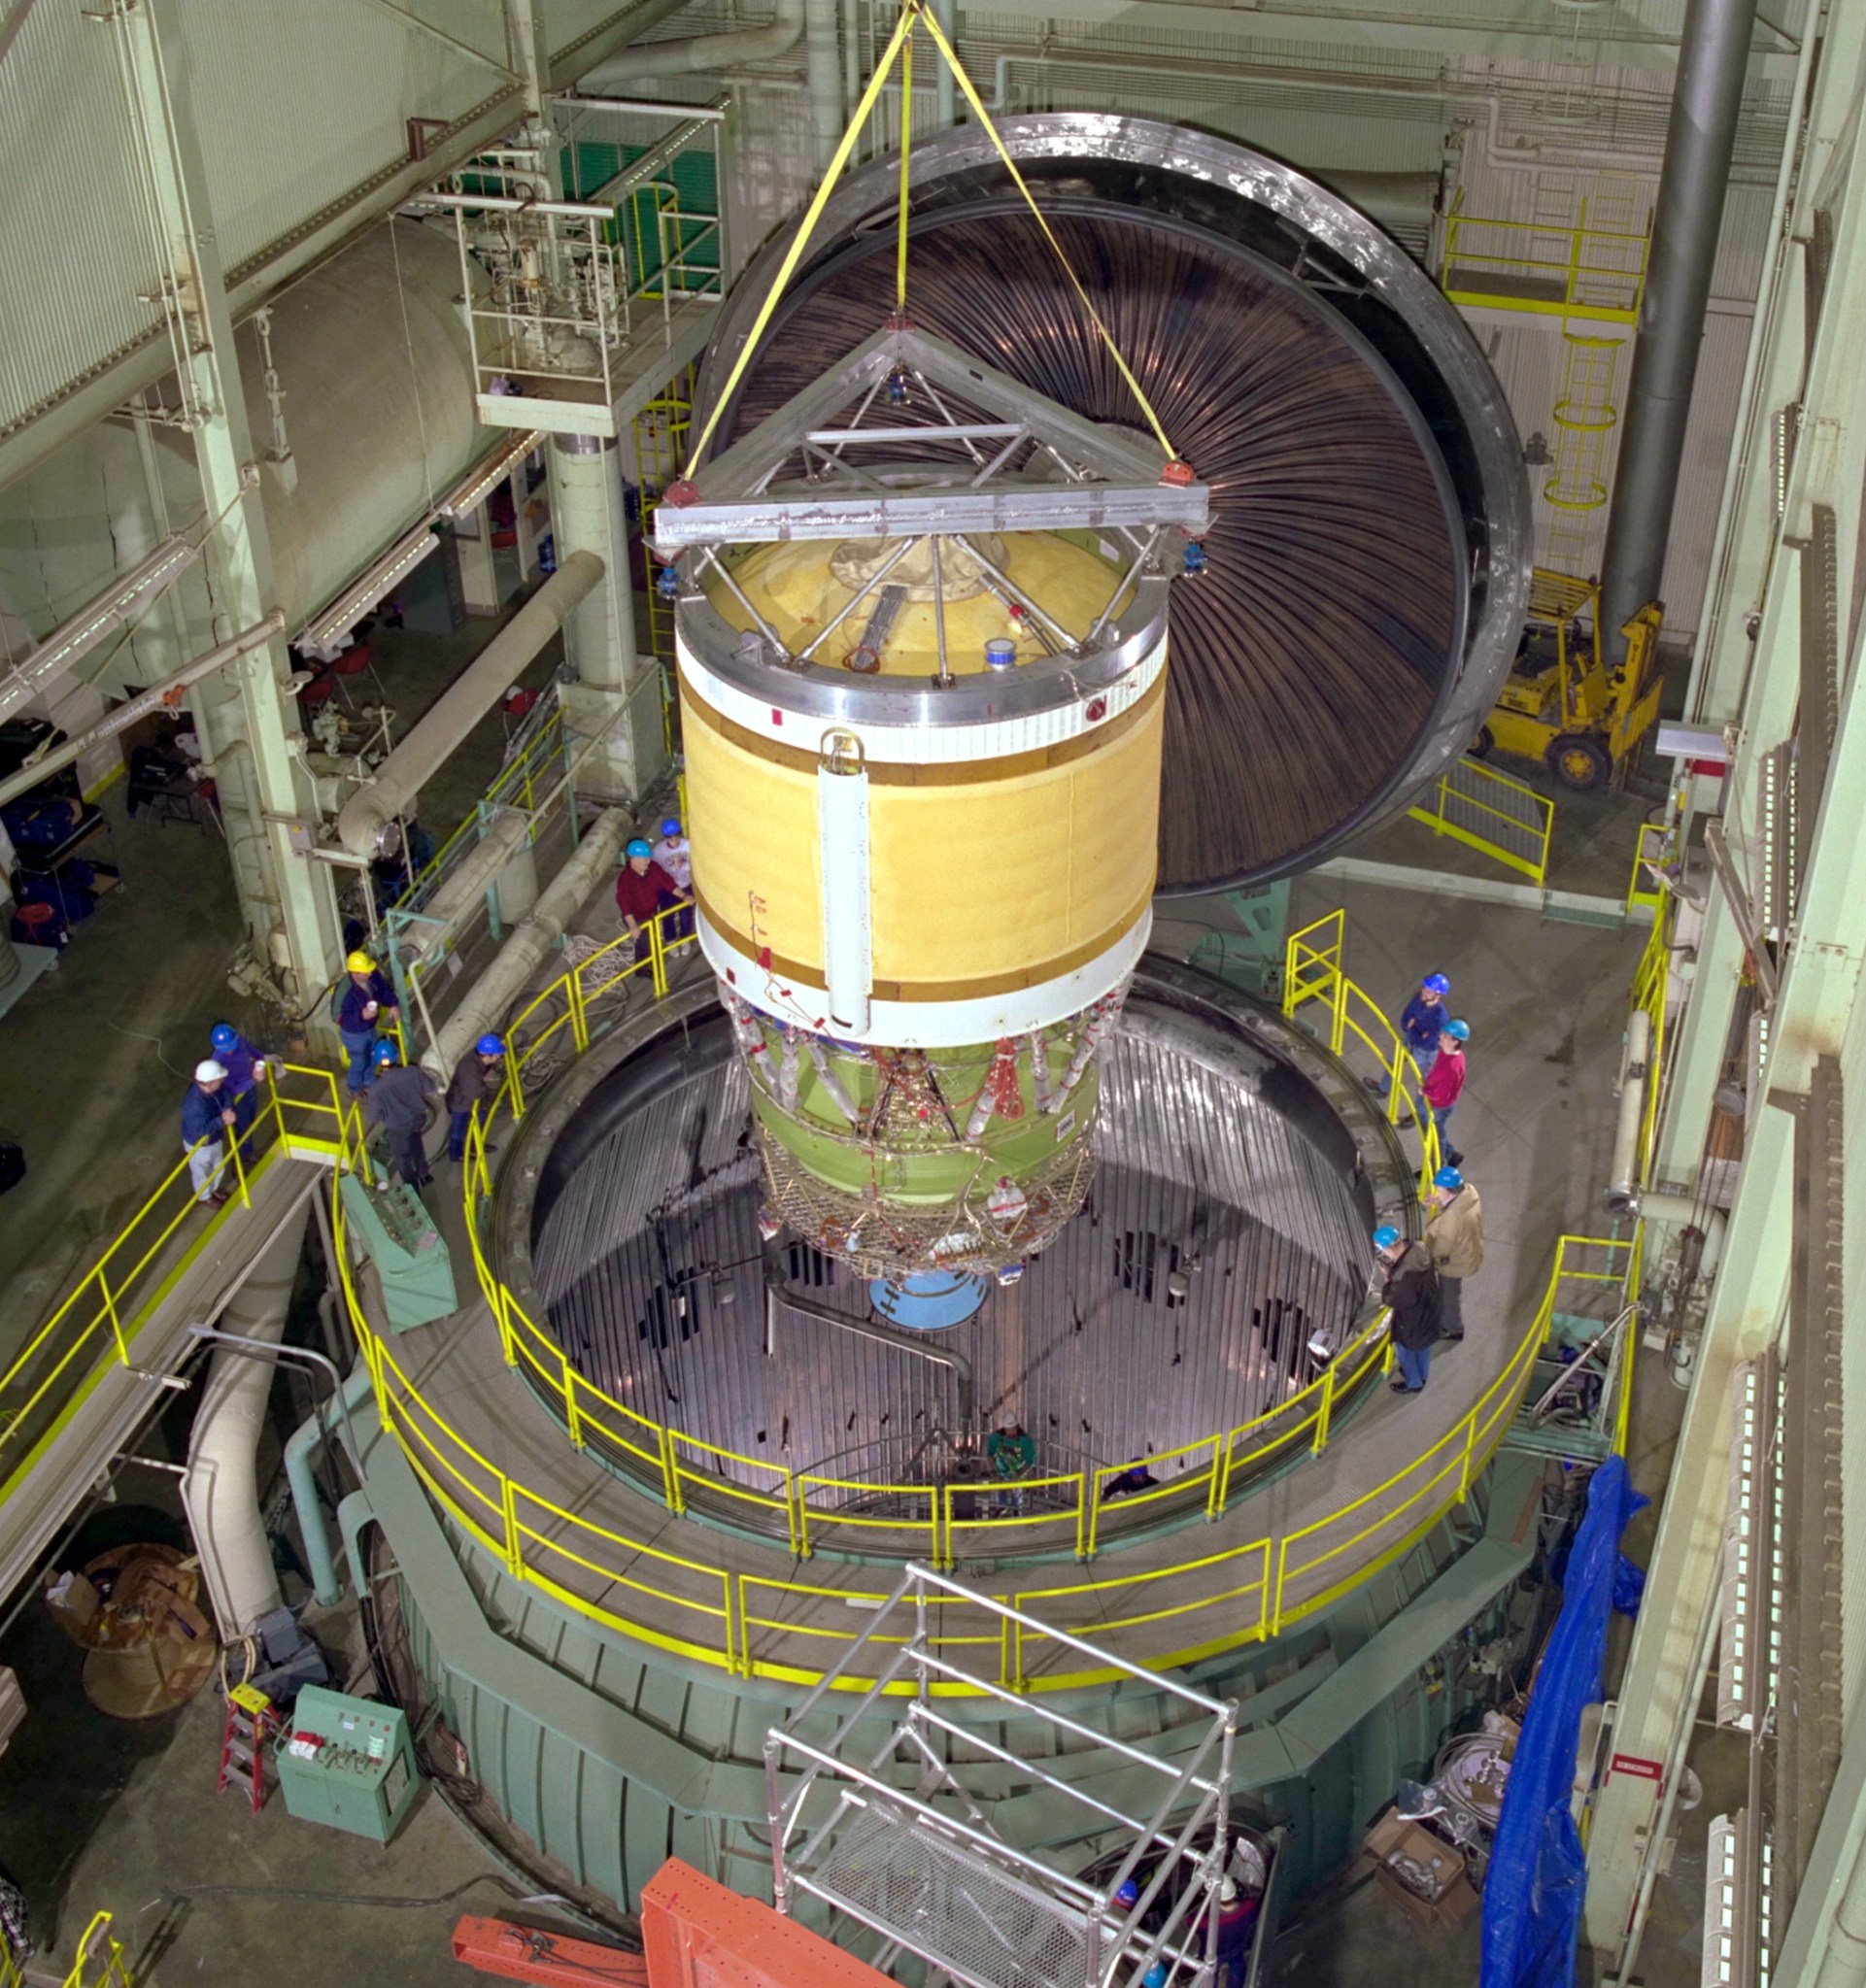 Rocket stage lowered into vacuum chamber.